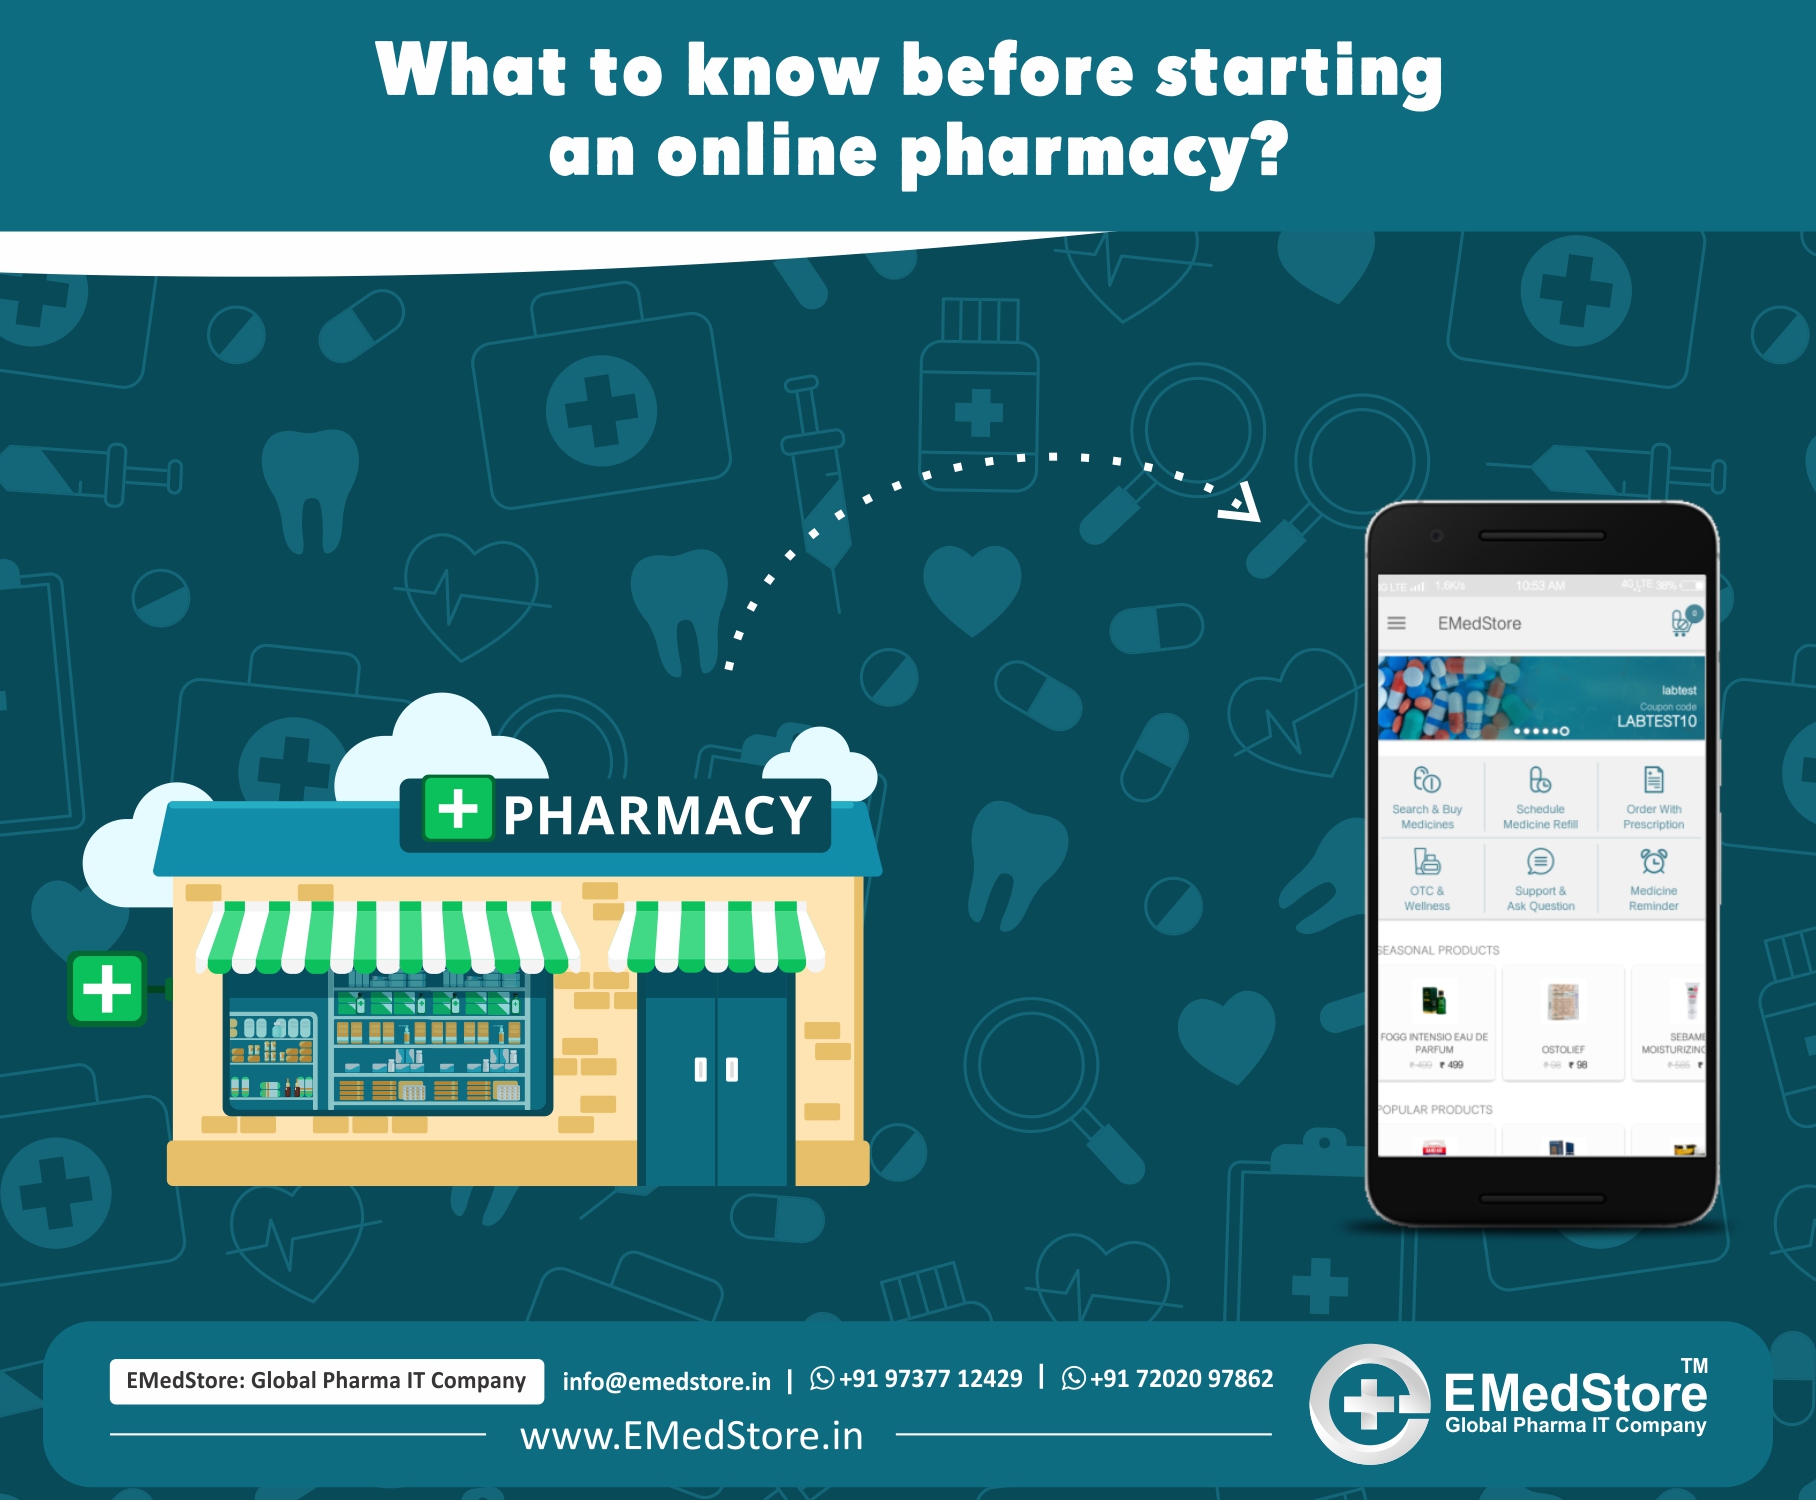 What to know before starting an online pharmacy?